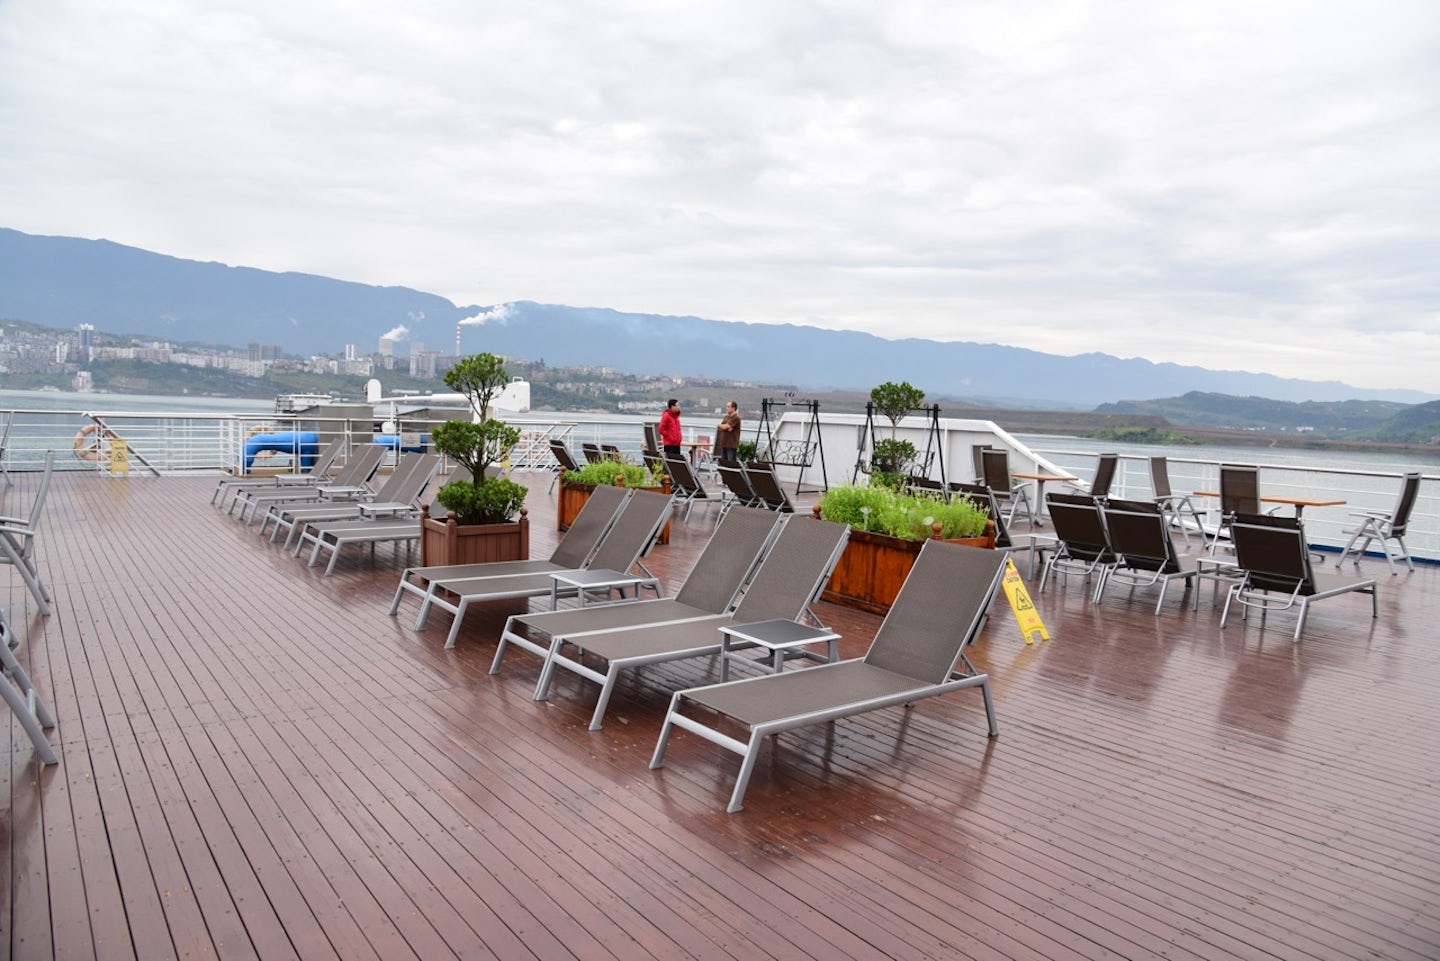 View of sun deck